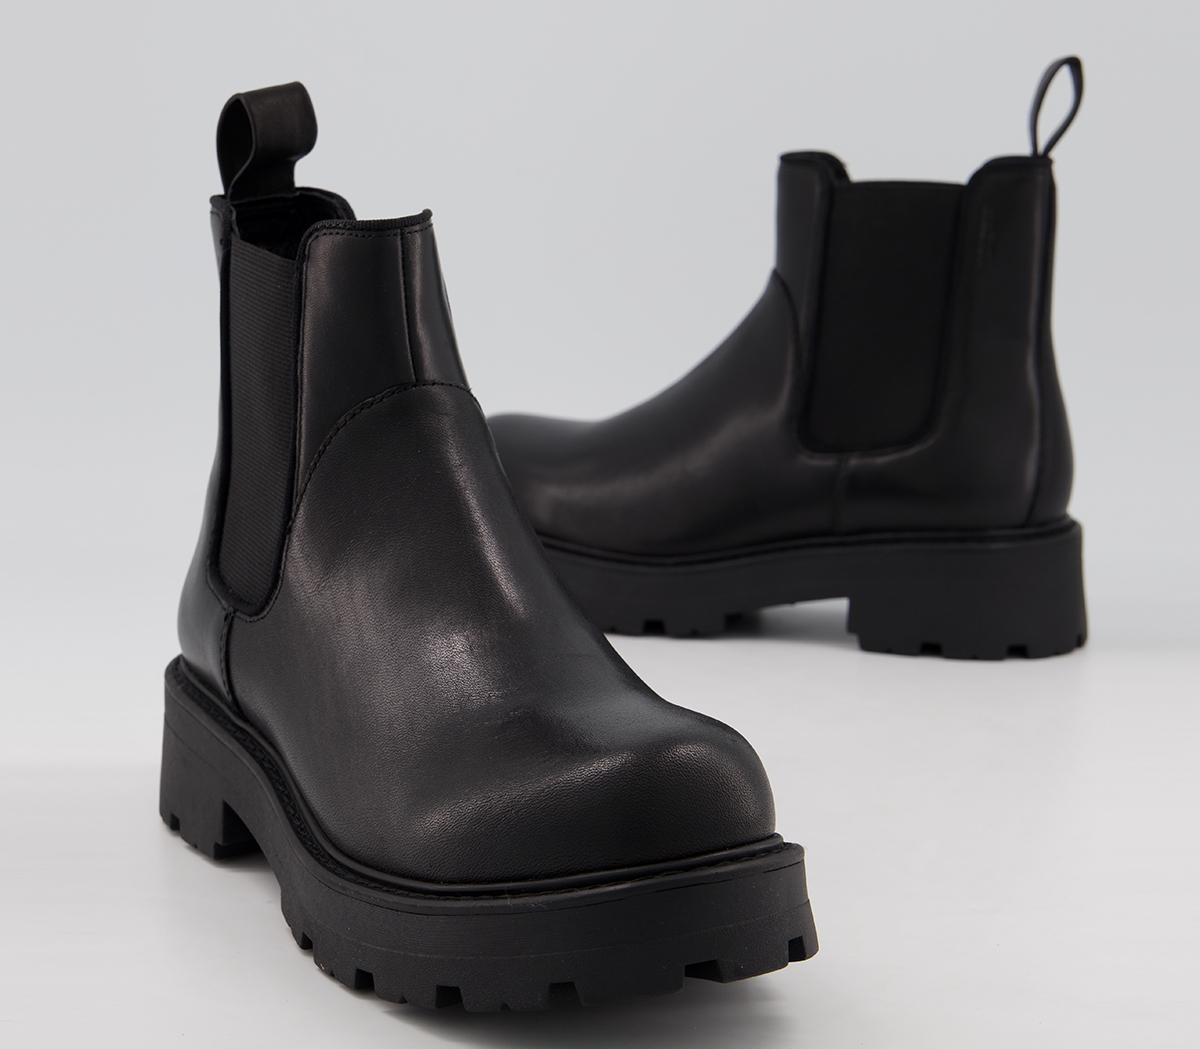 Vagabond Shoemakers Cosmo 2.0 Chelsea Boots Black - Women's Ankle Boots